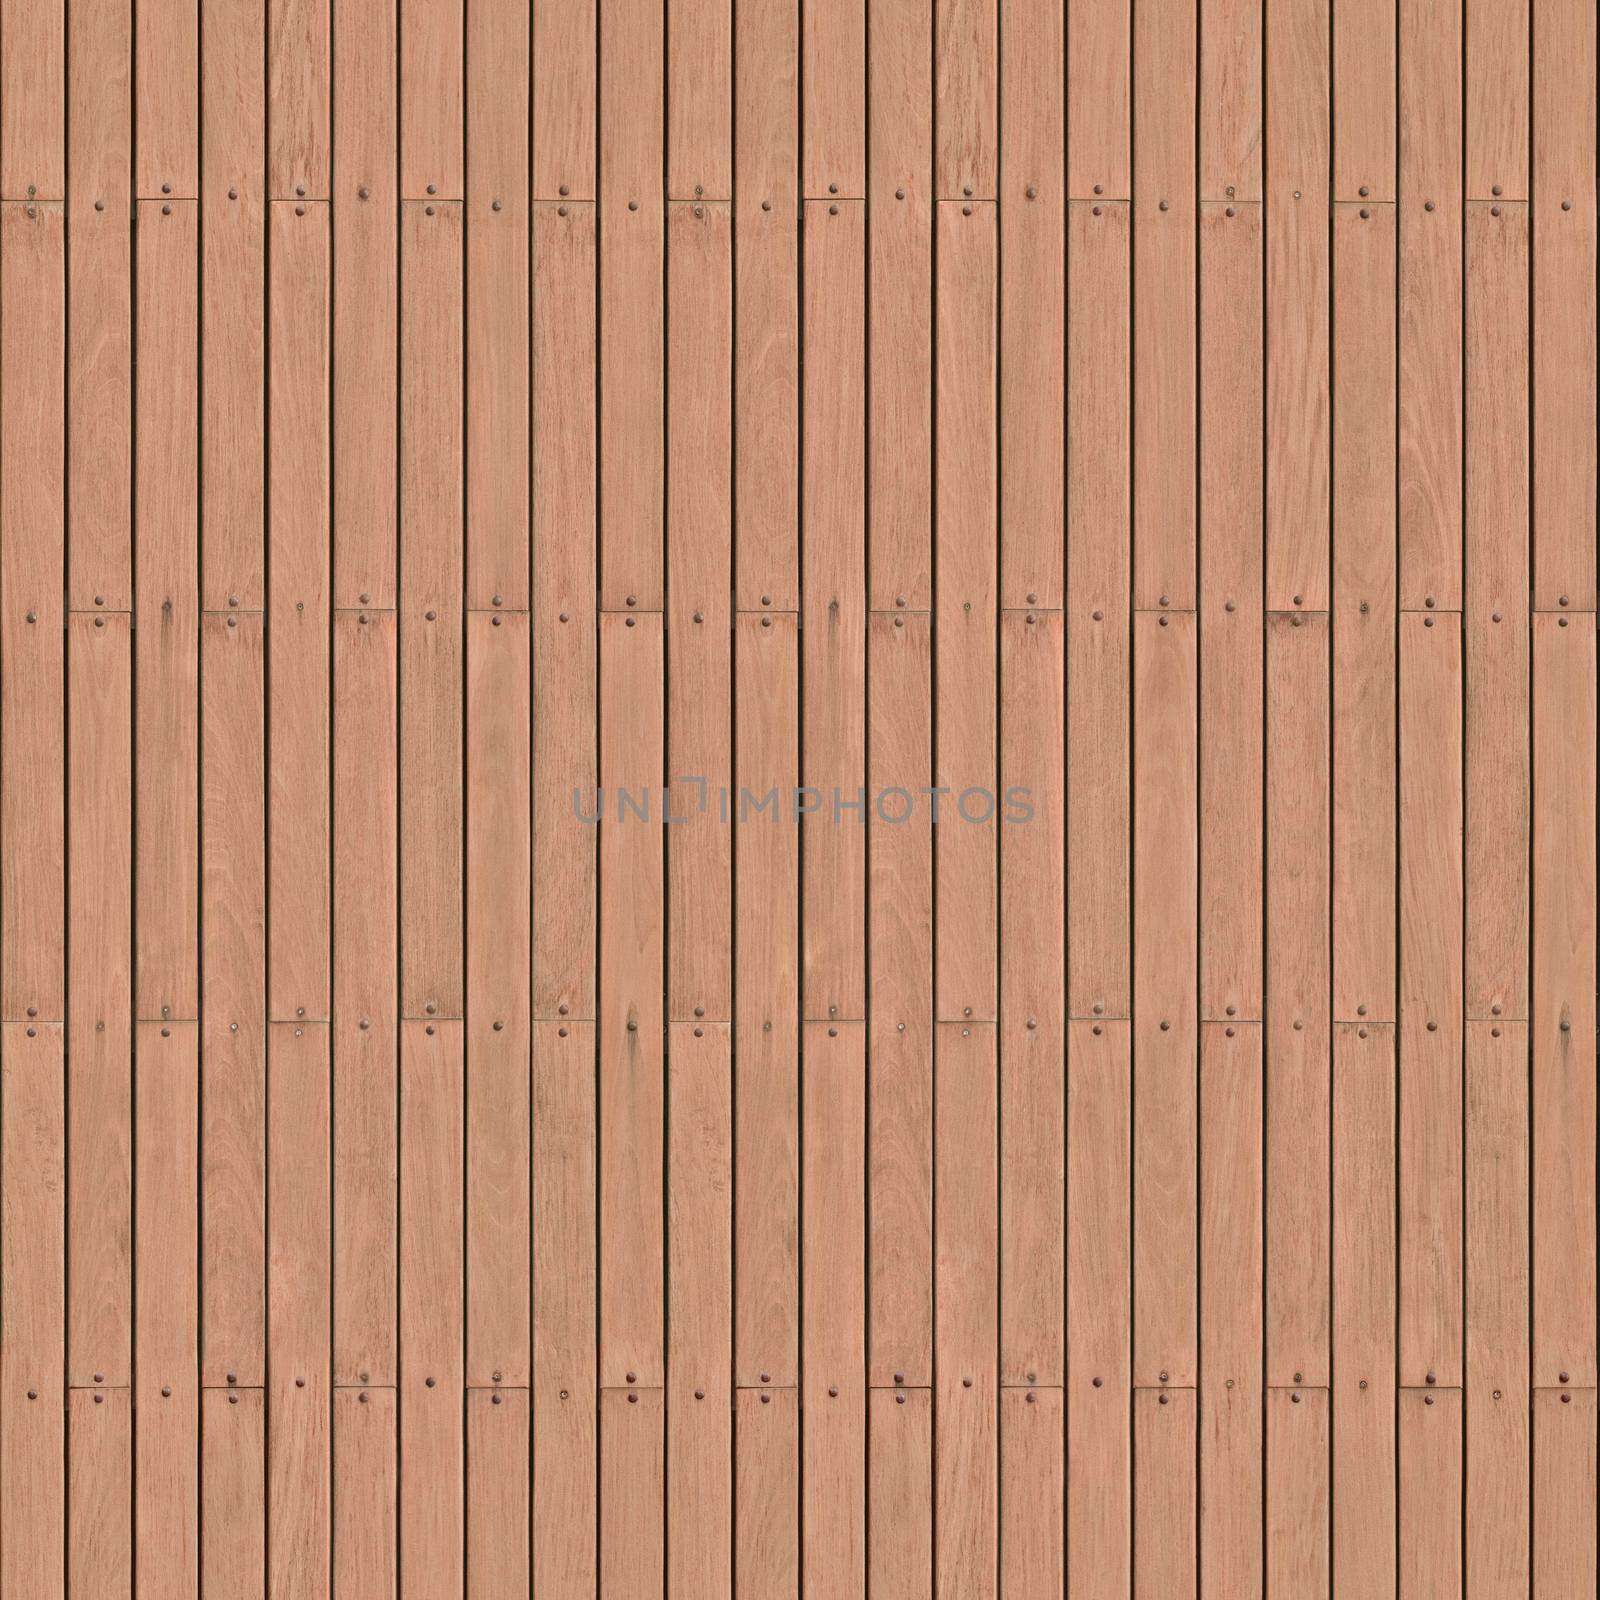 The vertical planks light brown hammered small nails .Background or texture